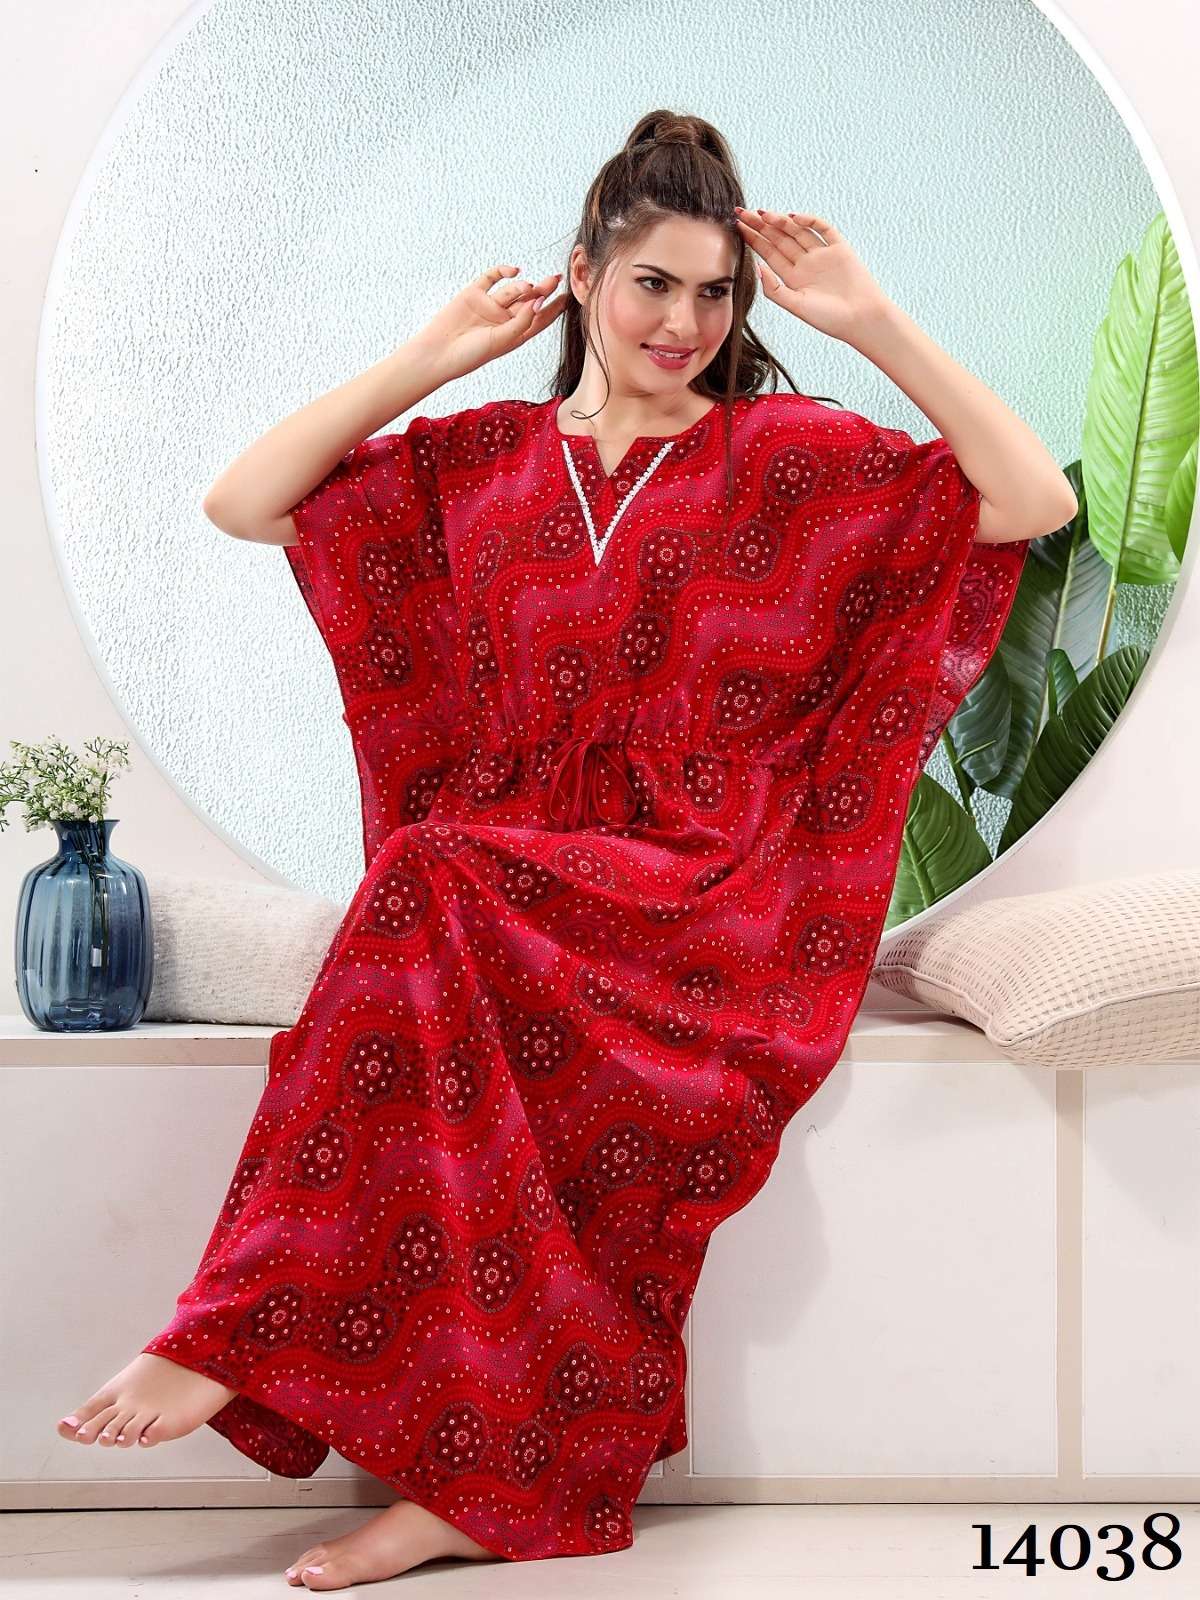 Buy Di Best Satin Nighty/Freely Soft & Silky Satin Nighty/Satin Night Gown/Satin  Maxi-Free Size Red at Amazon.in